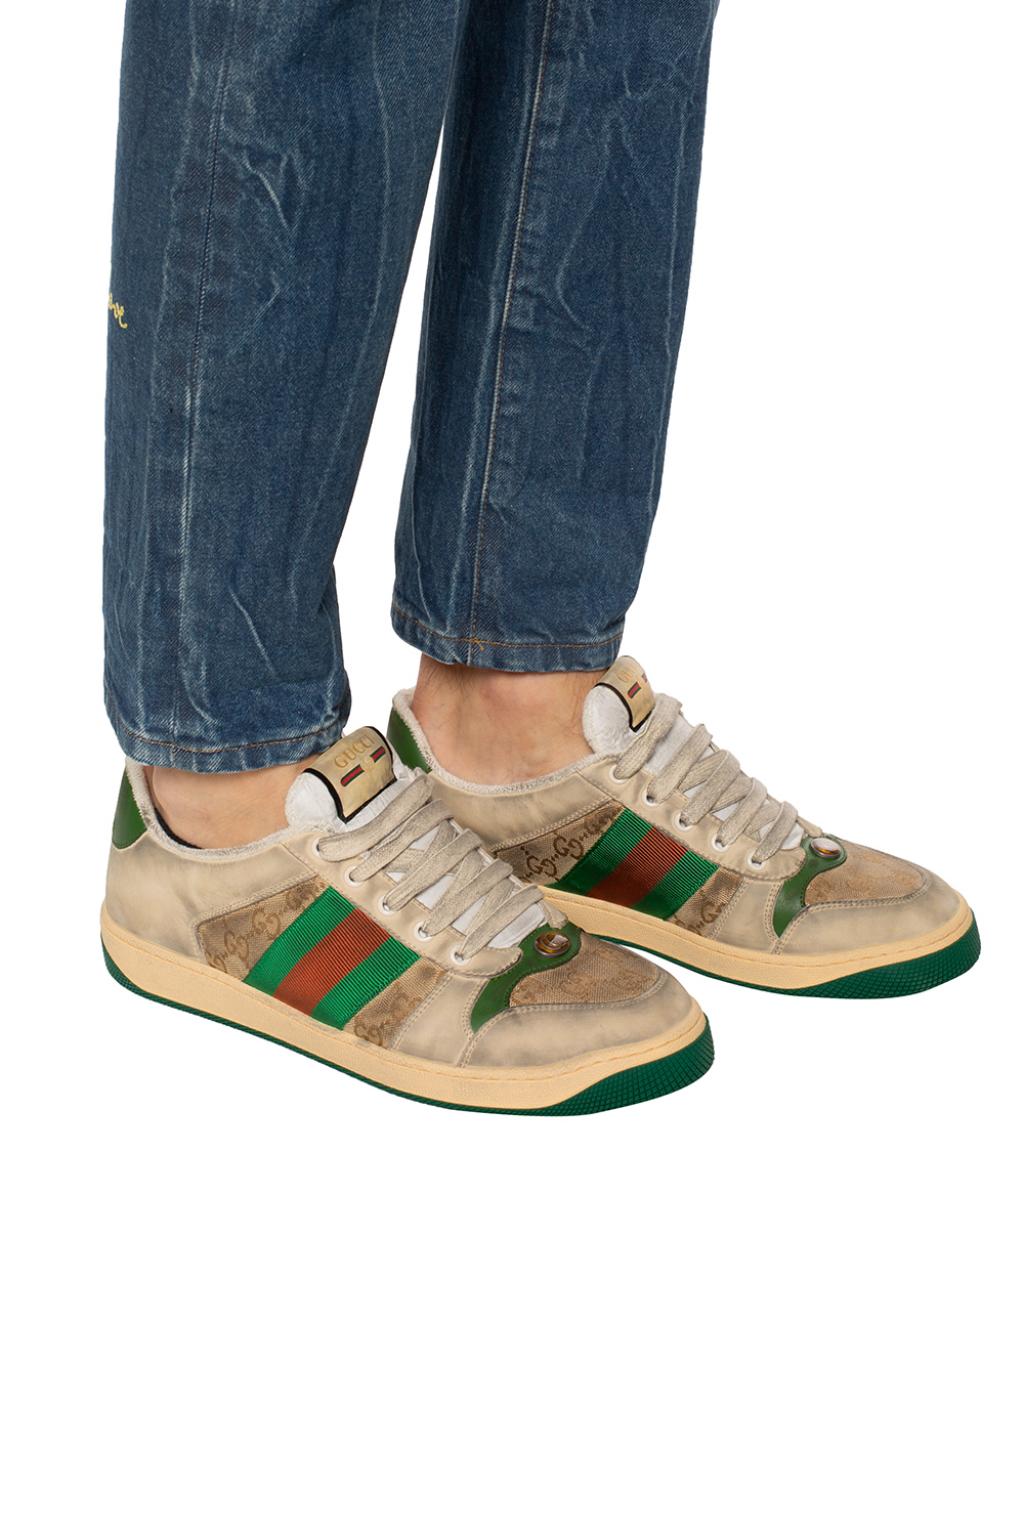 Gucci Dirty Sneakers